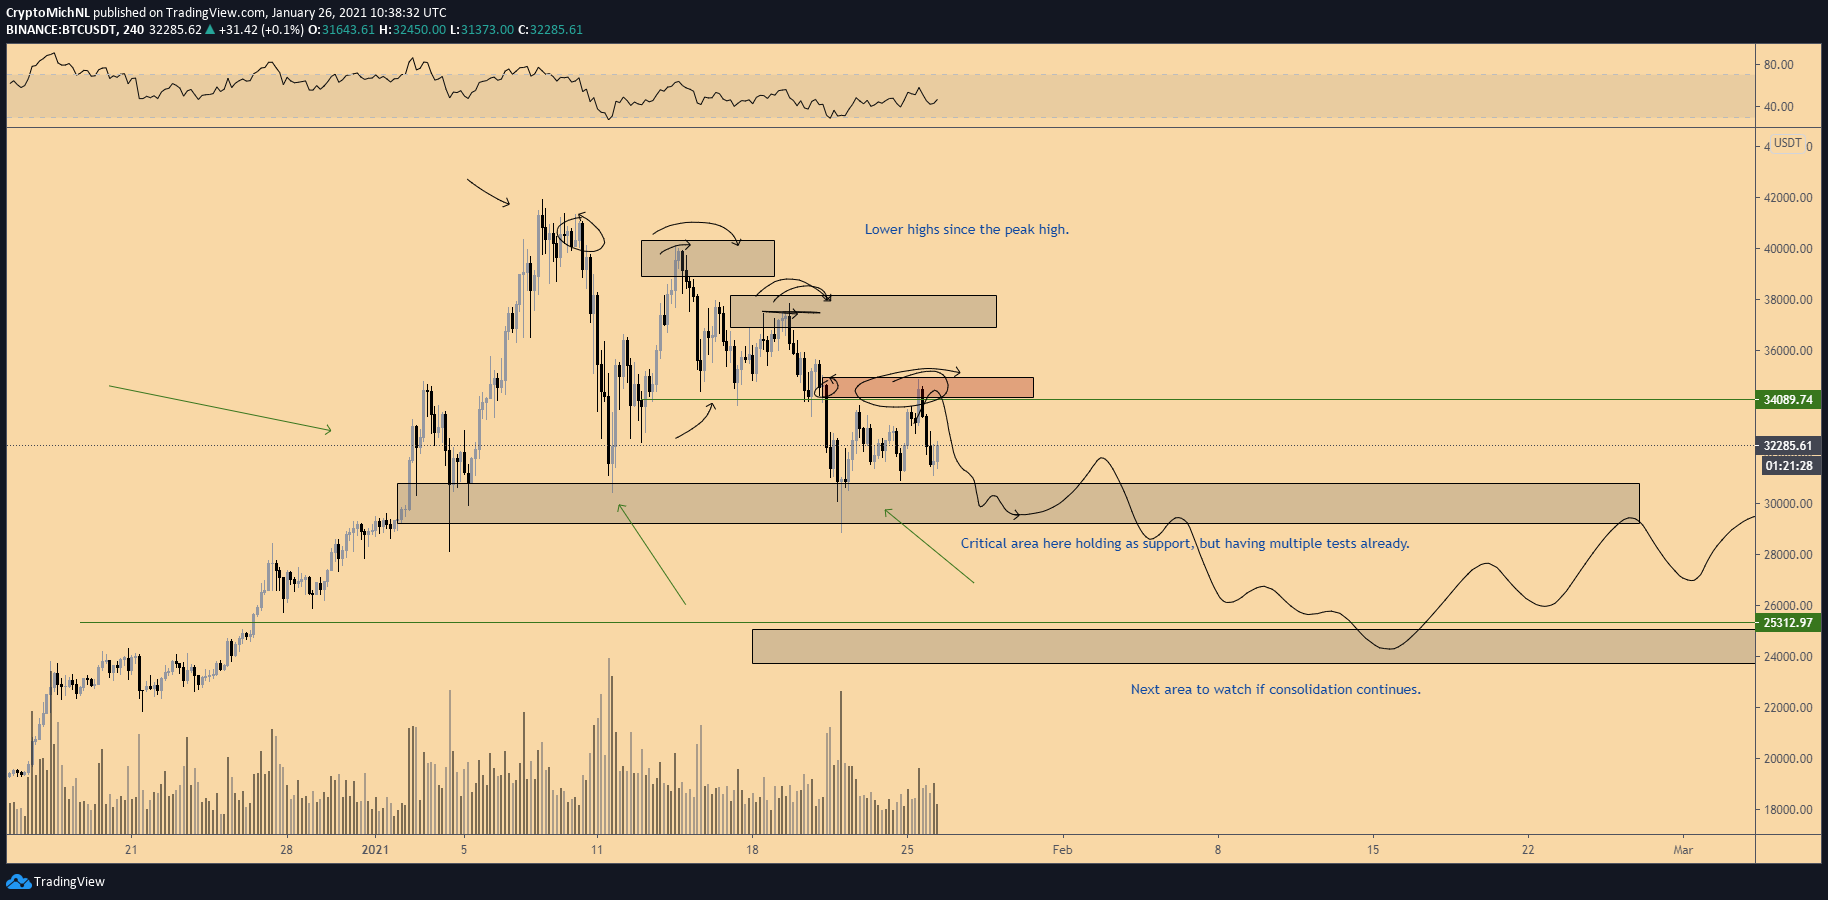 Michael Van De Poppe The Critical Area For Bitcoin Is Still The 30k Zone On The Downside And The 34k Barrier On The Upside In Between Is Just Range Bound Construction